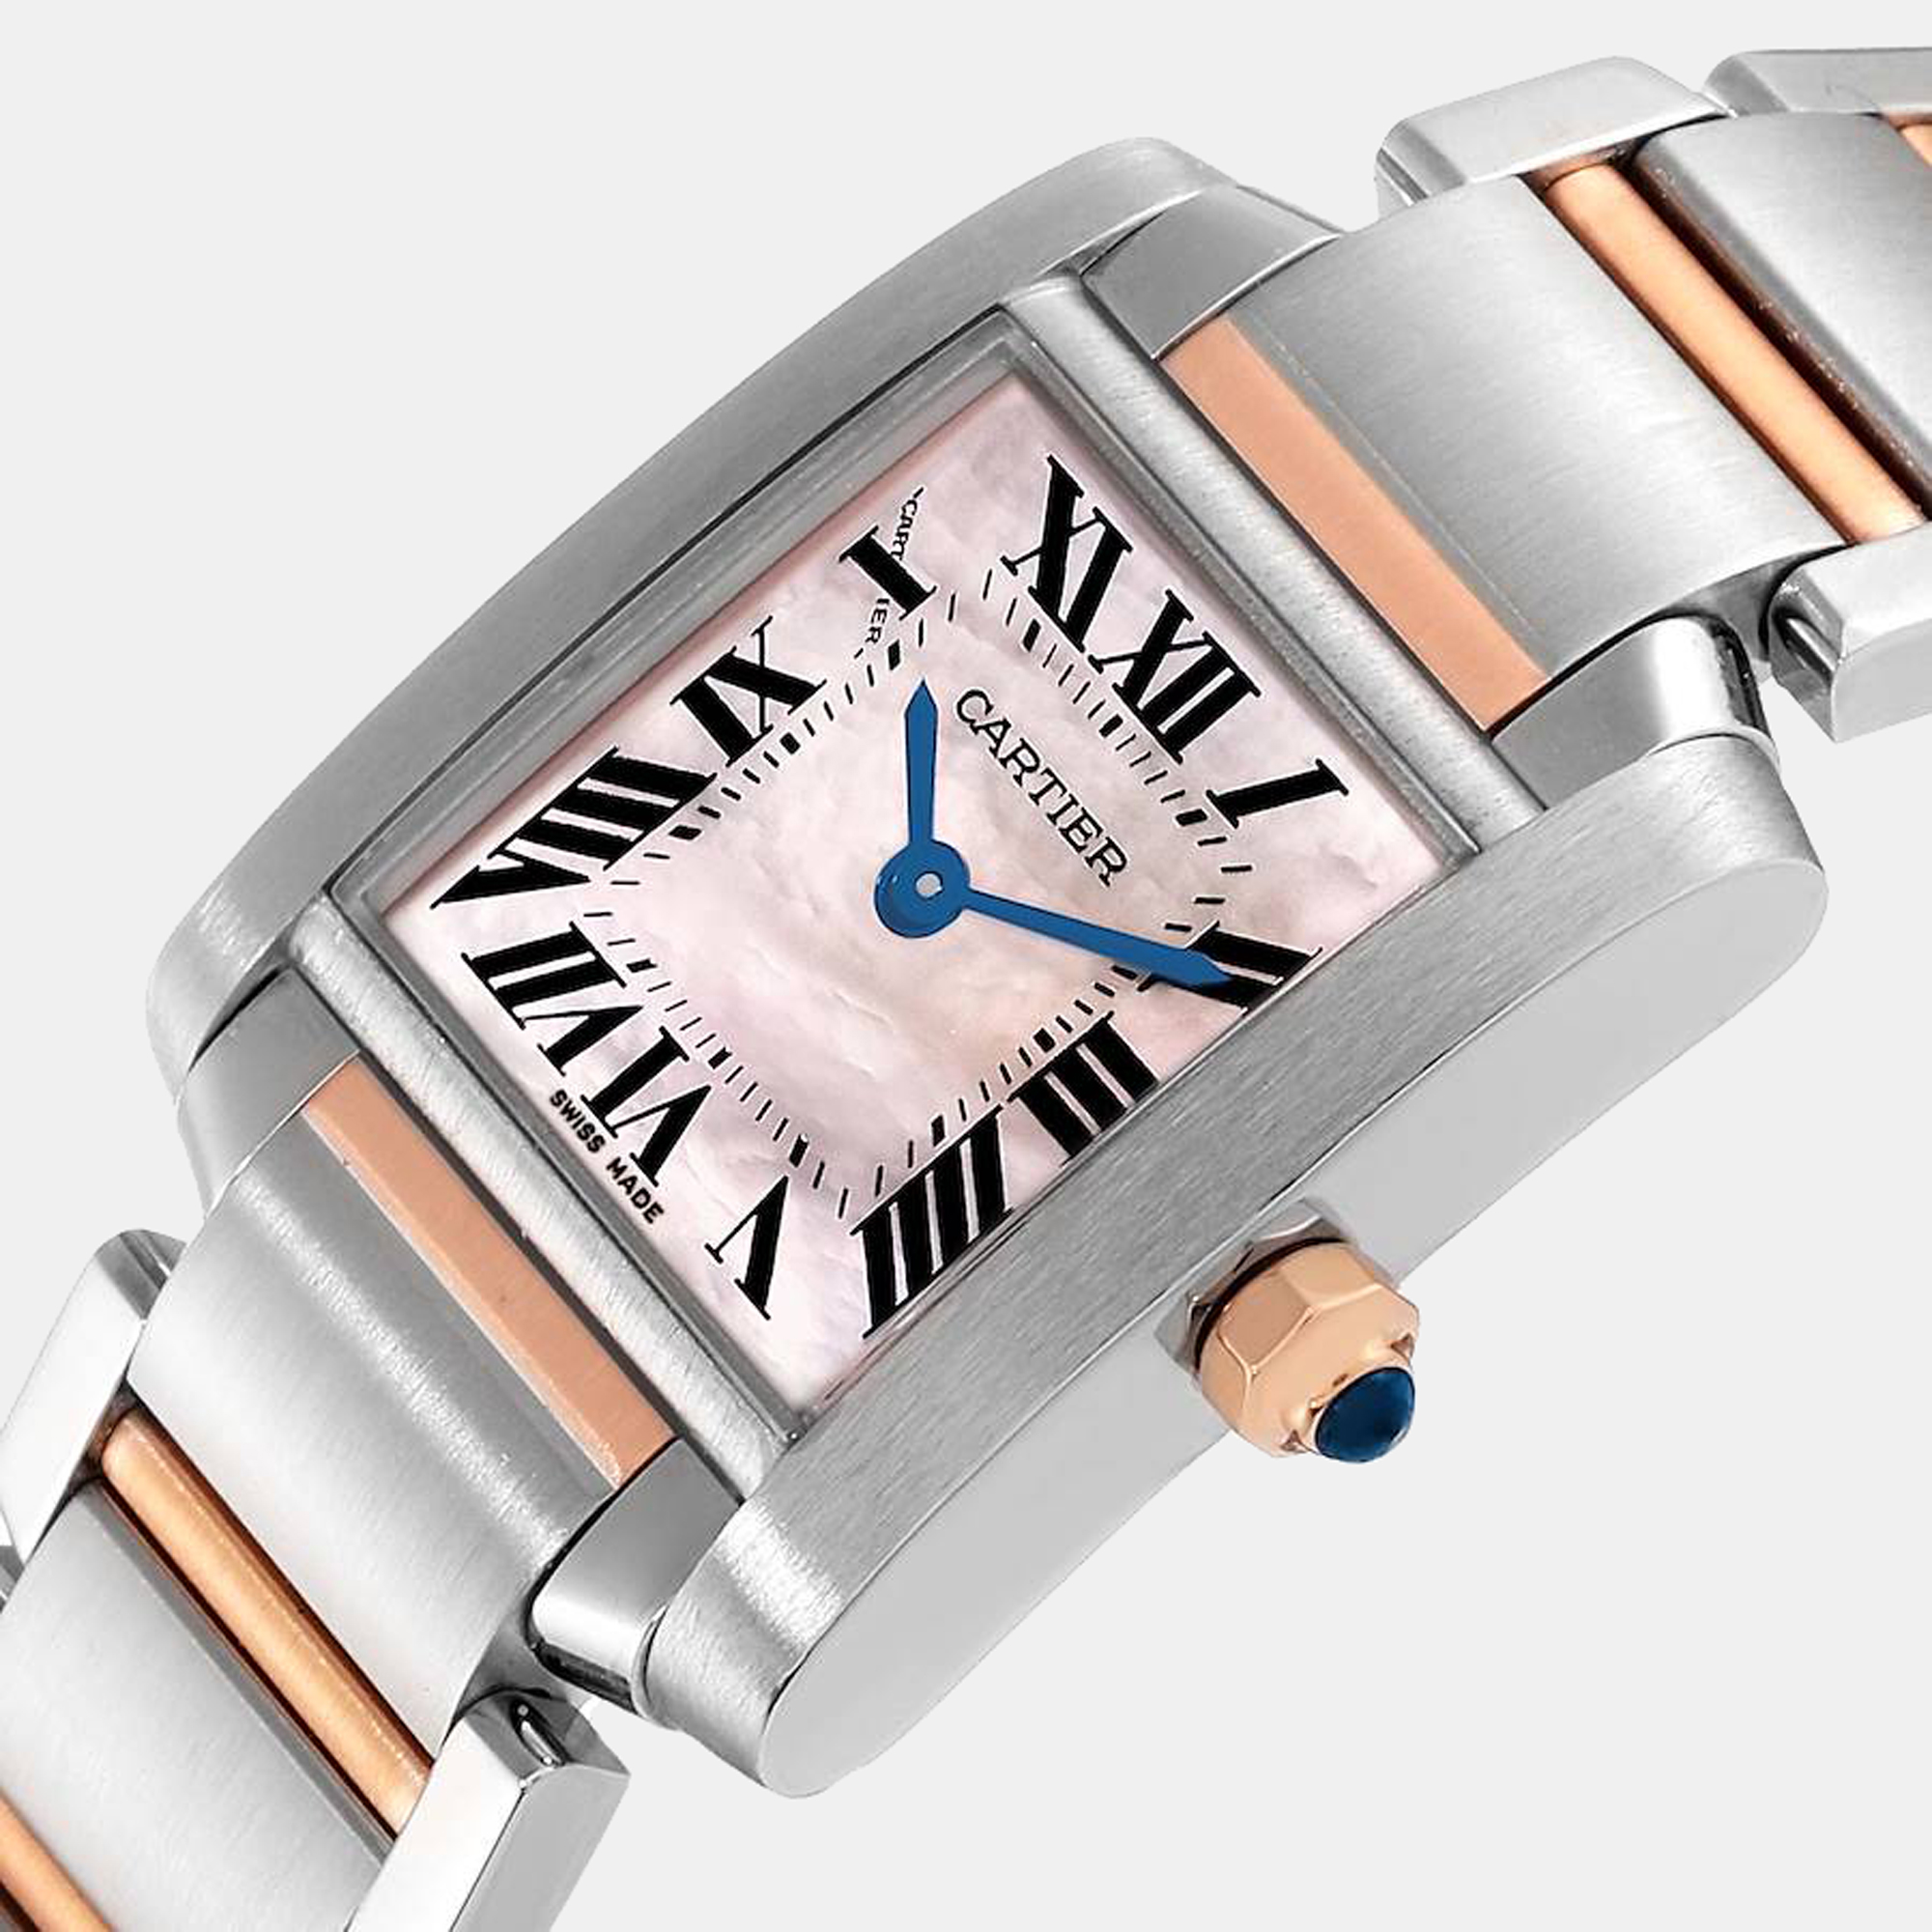 

Cartier Pink Mother of Pearl 18k Rose Gold And Stainless Steel Tank Francaise W51027Q4 Quartz Women's Wristwatch 20 mm